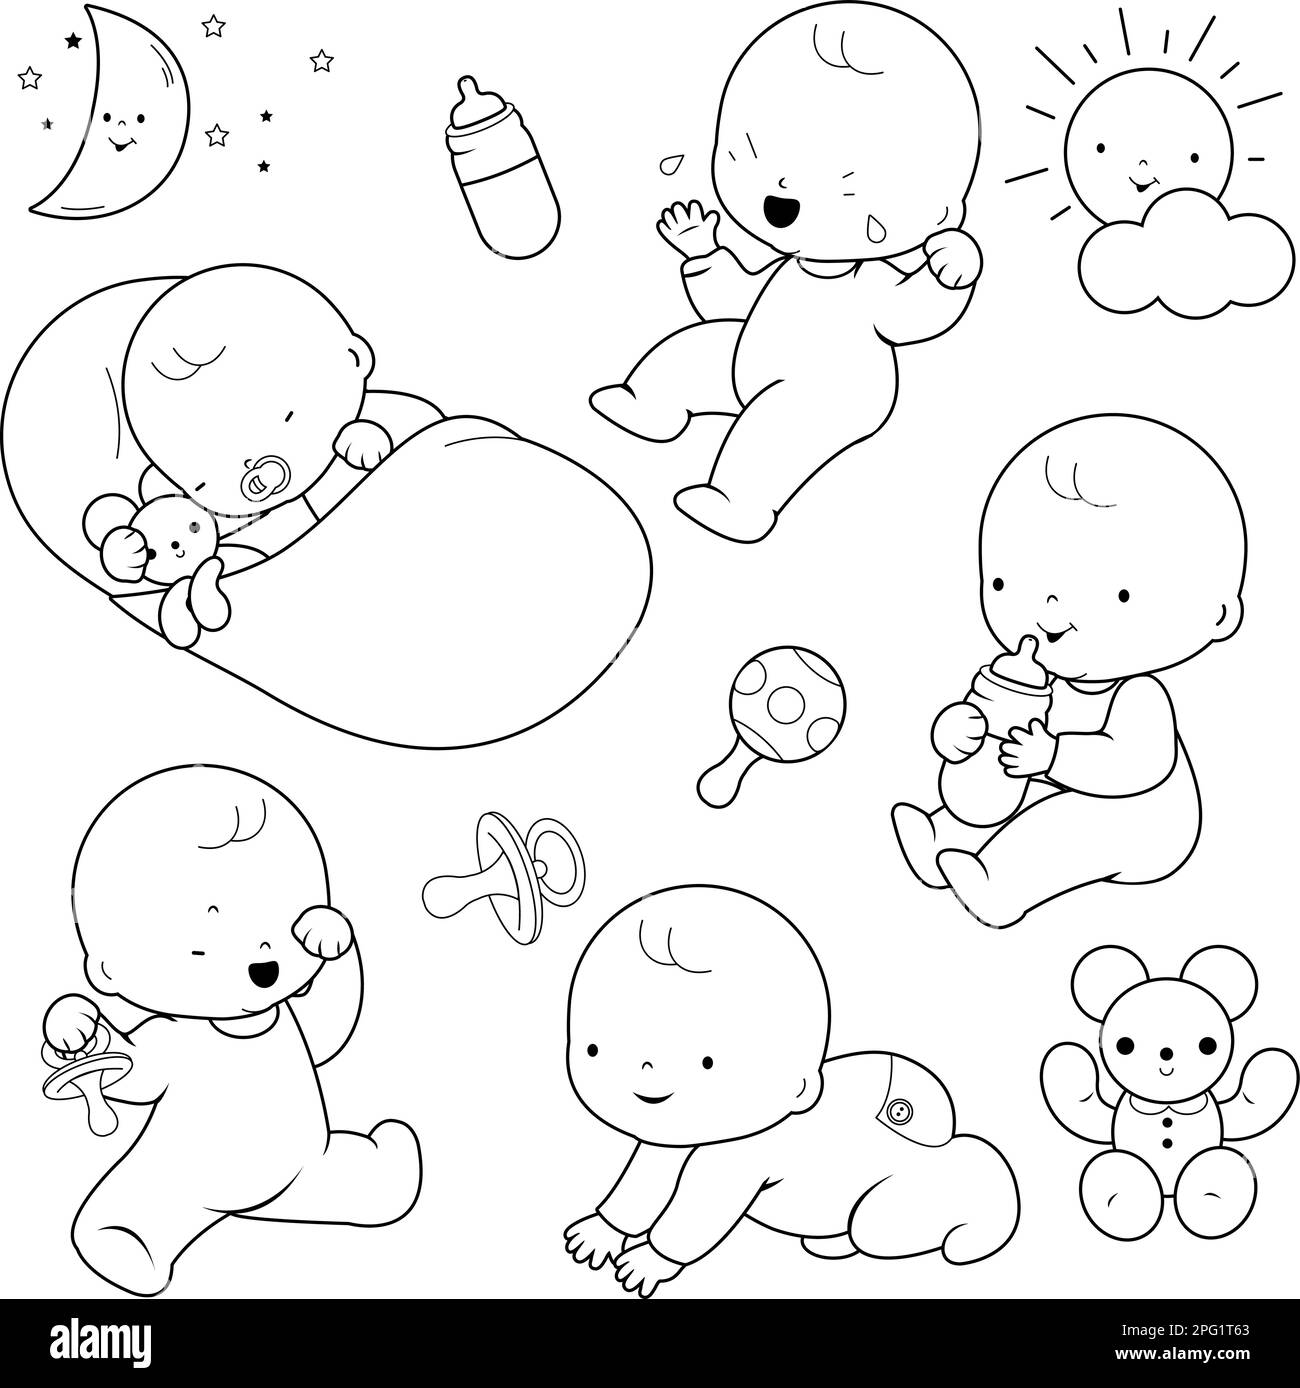 Cute babies sleeping, playing, crying, drinking milk, crawling. Vector black and white coloring page. Stock Vector